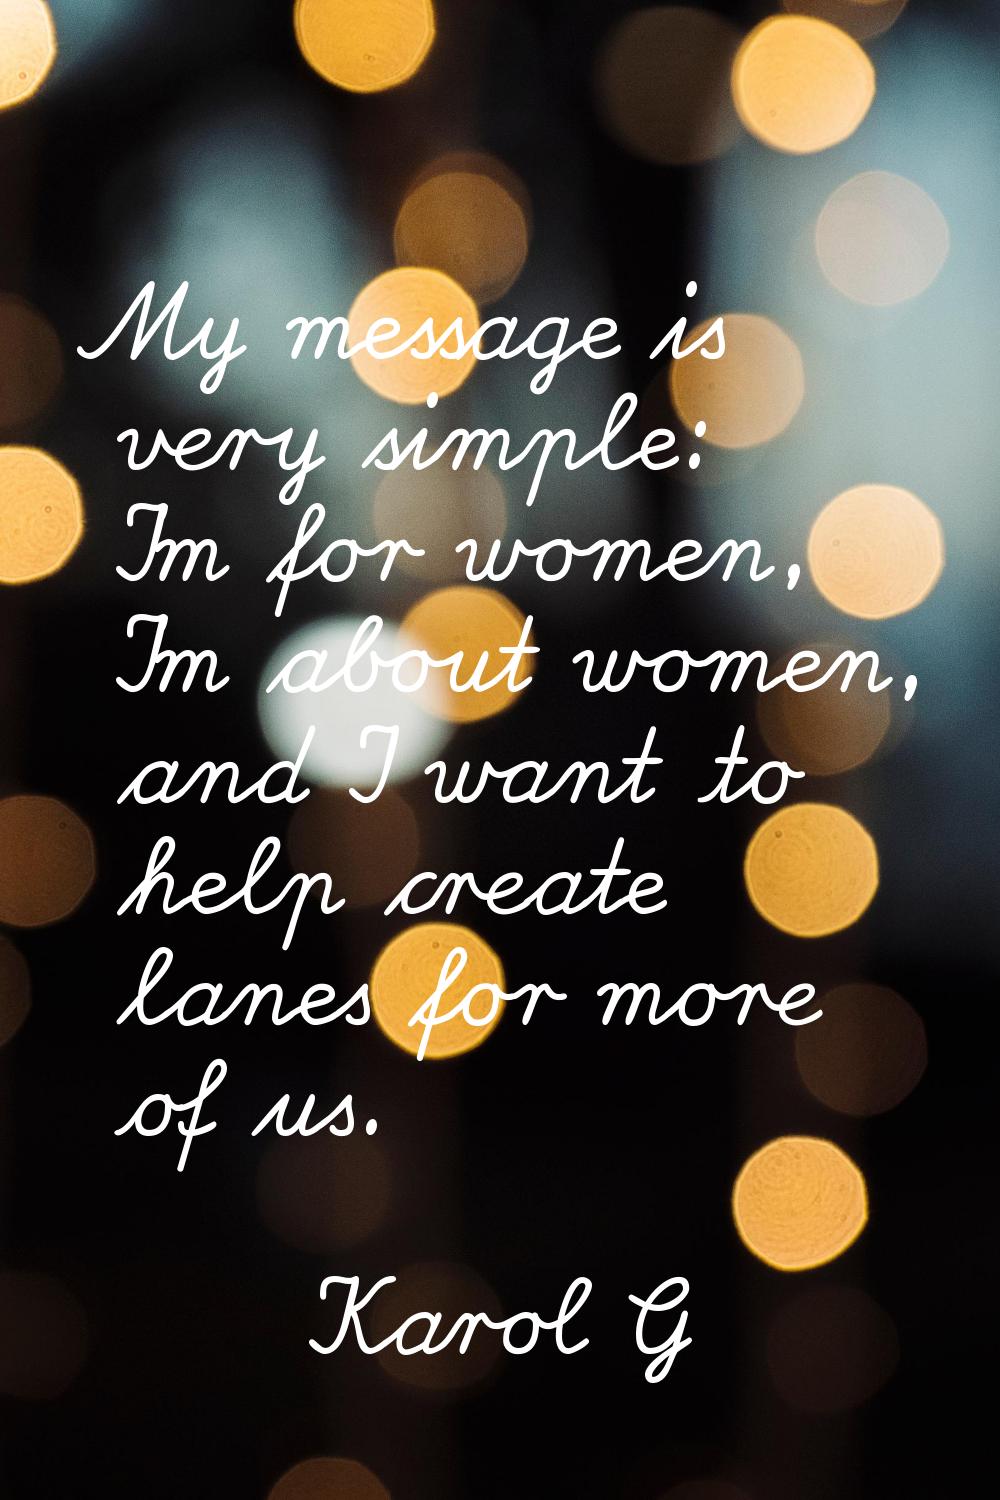 My message is very simple: I'm for women, I'm about women, and I want to help create lanes for more